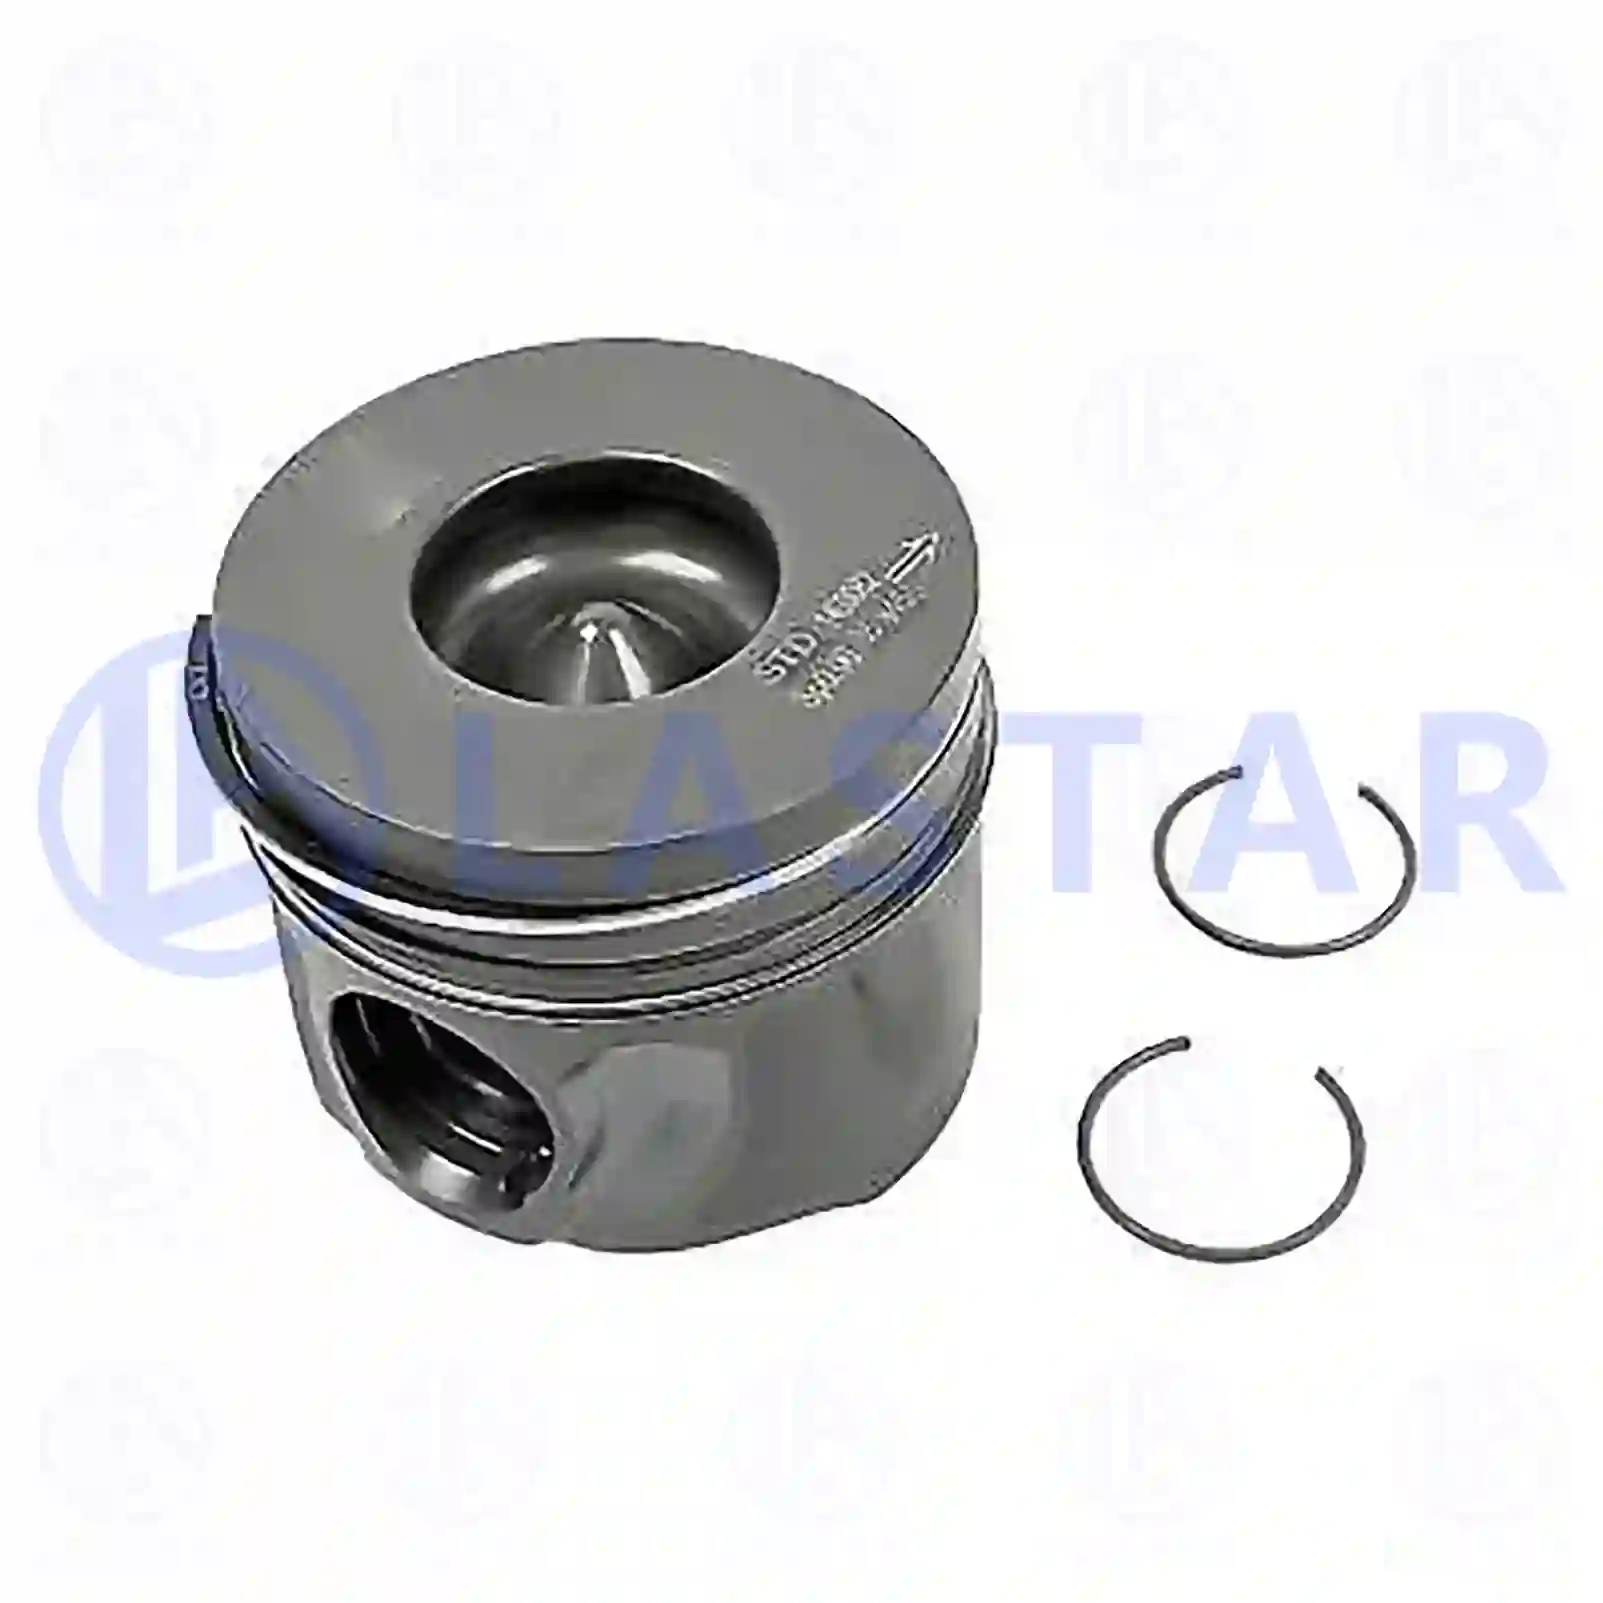 Piston, complete with rings, 77700674, 1348295, 1349787, 3S7Q-6K100-EAB ||  77700674 Lastar Spare Part | Truck Spare Parts, Auotomotive Spare Parts Piston, complete with rings, 77700674, 1348295, 1349787, 3S7Q-6K100-EAB ||  77700674 Lastar Spare Part | Truck Spare Parts, Auotomotive Spare Parts